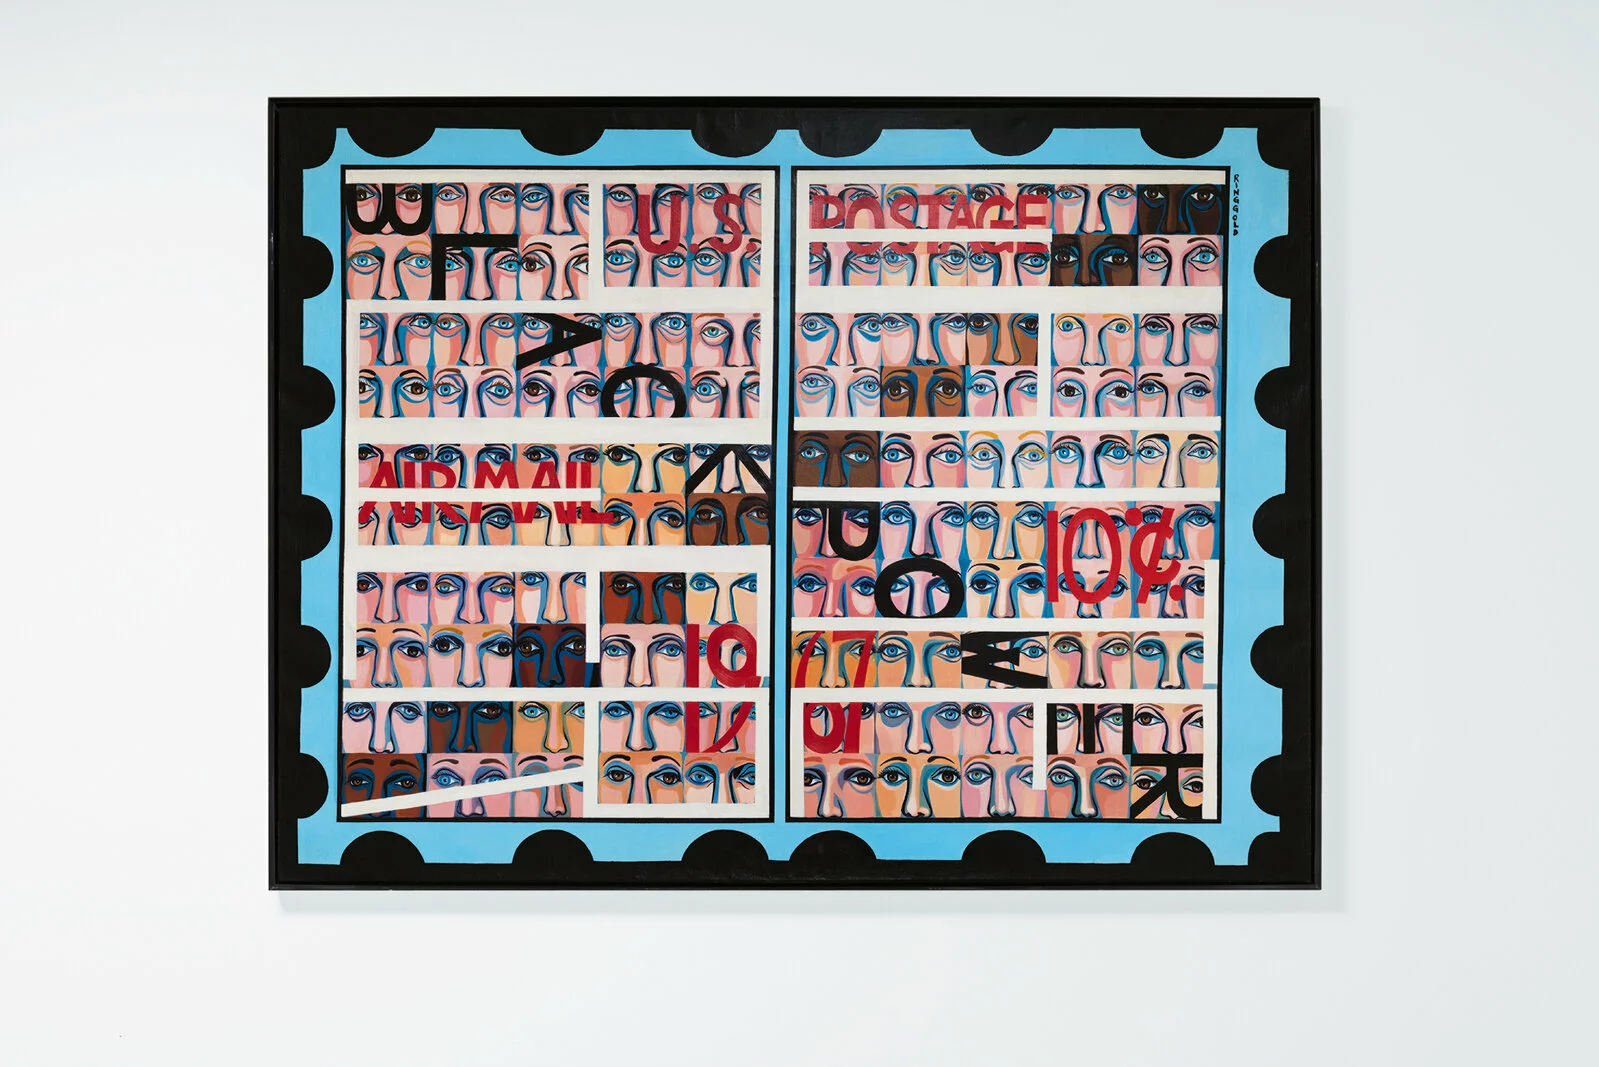 Faith Ringgold (b. 1930, New York, NY), <em>American People Series #19: U.S. Postage Stamp Commemorating the Advent of Black Power</em>, 1967. Oil on canvas; 73 1/272 × 96 in. (182.9 × 243.8 cm). Courtesy the artist and ACA Galleries, New York. © 2023 Faith Ringgold / Artists Rights Society (ARS), New York. 2023/08/P6422-0045_REPLACEMENT_1-srgb.jpg 